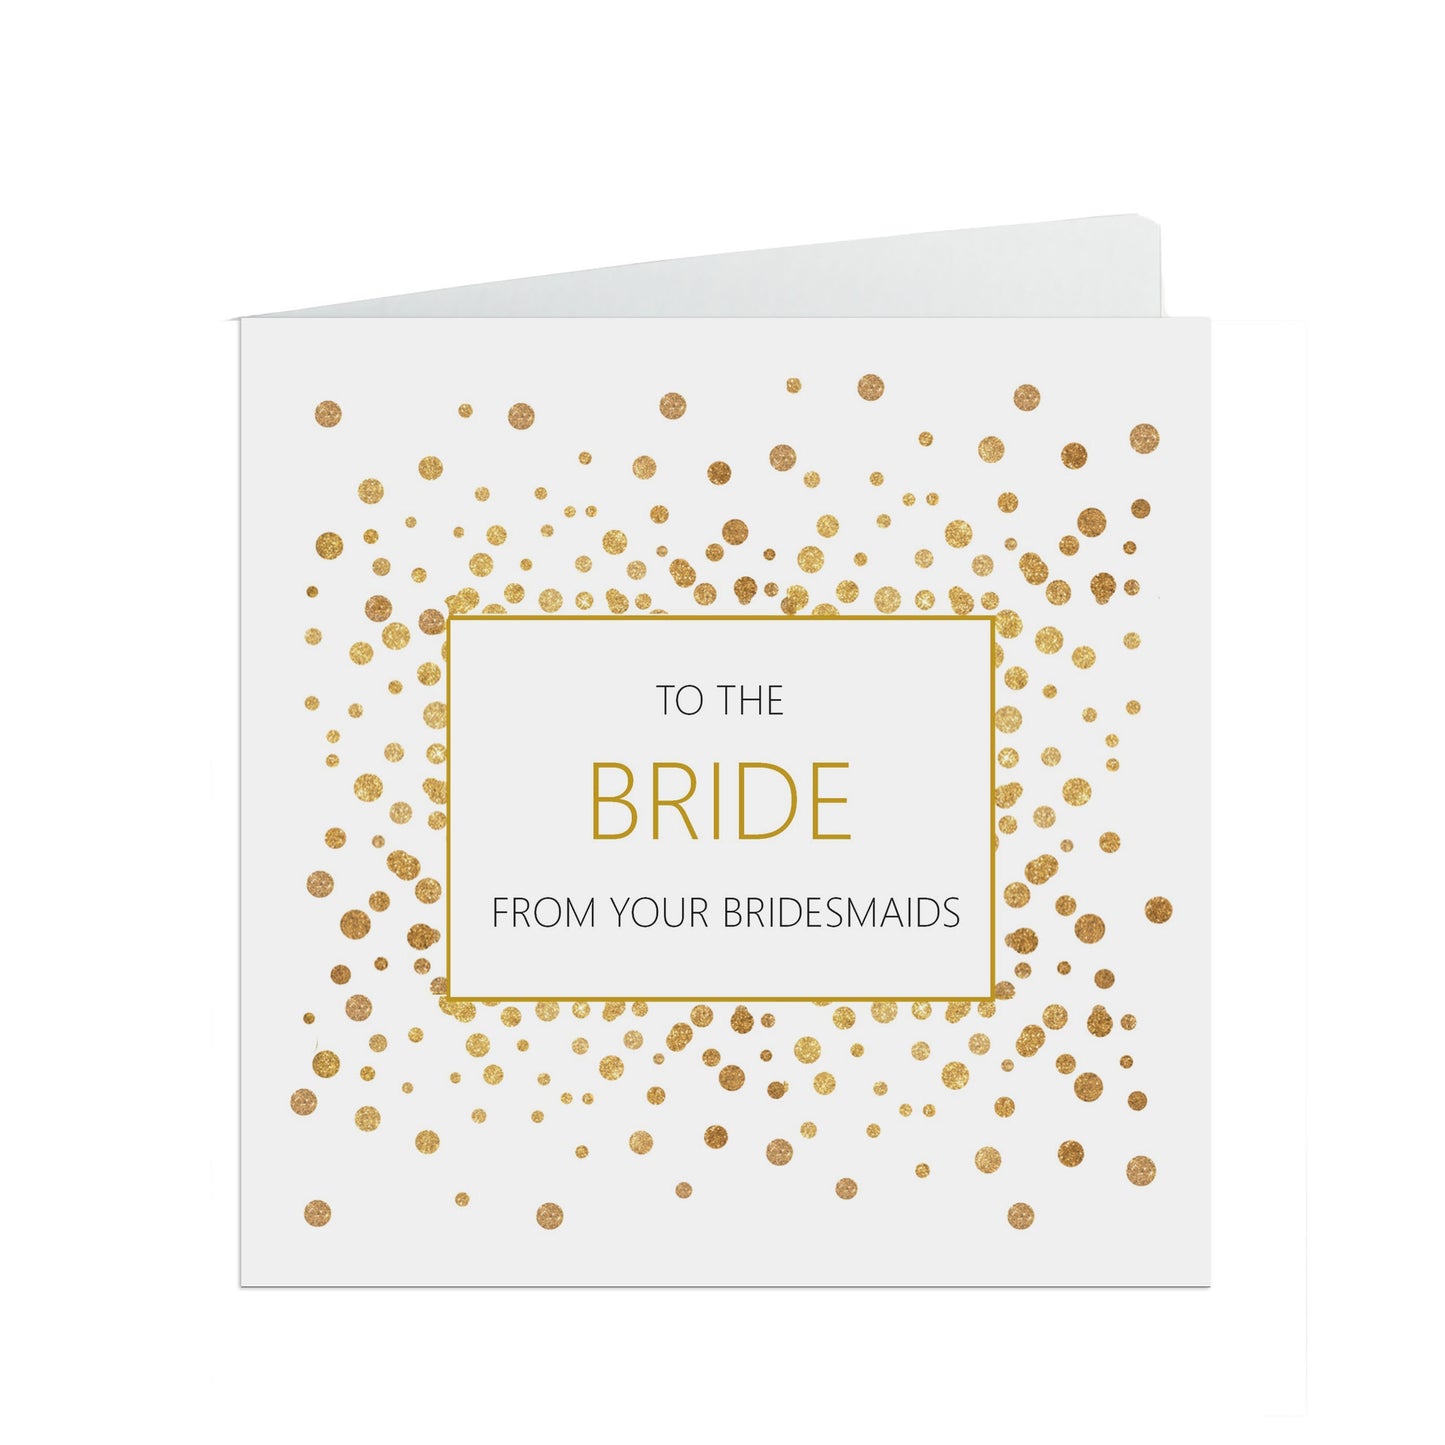 Bride From Your Bridesmaids, Gold Effect Confetti 6x6 Inches With A White Envelope